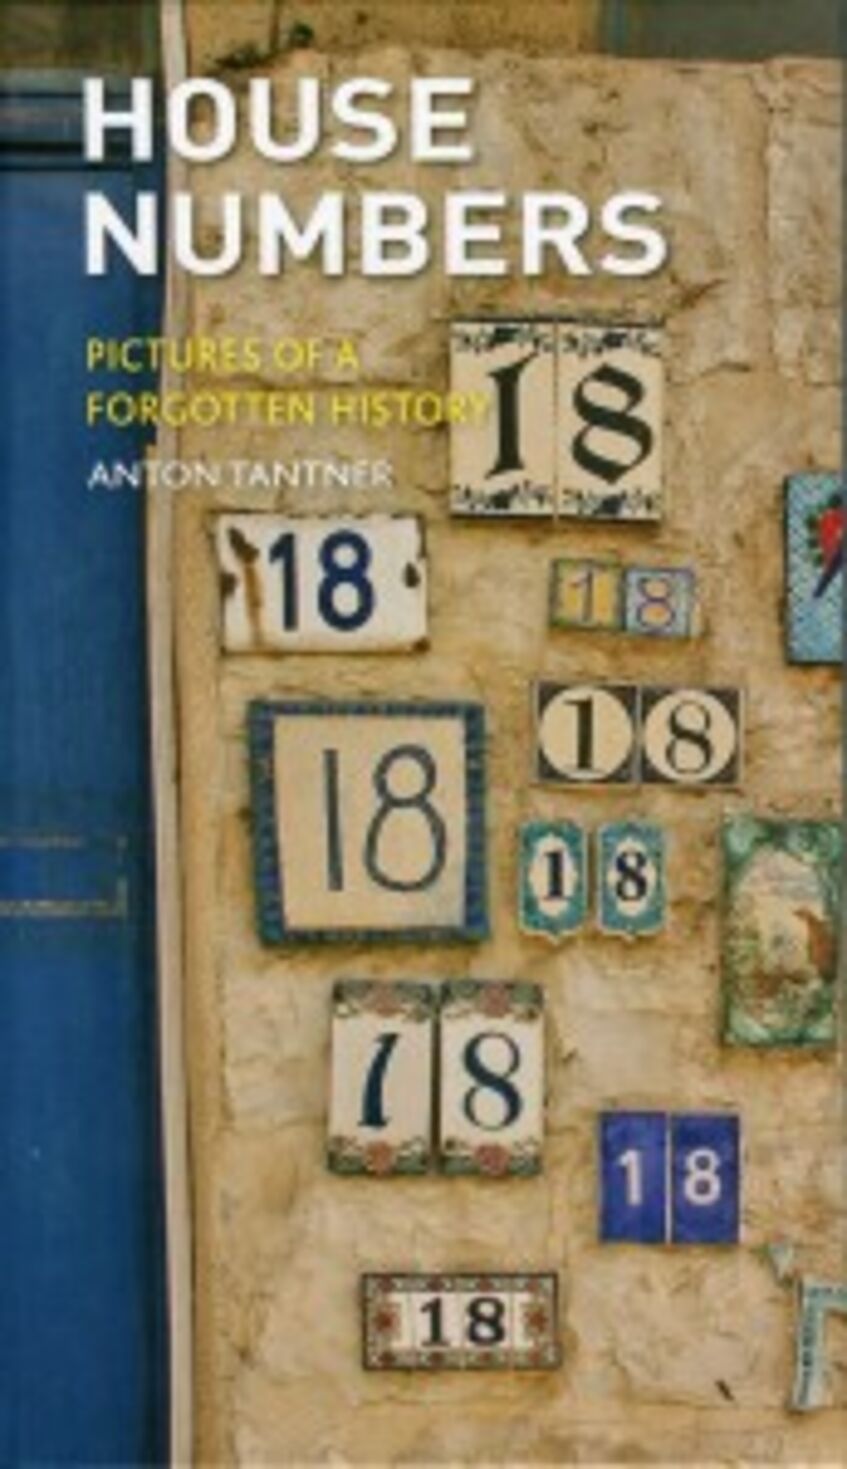 House Numbers. Pictures of a Forgotten History. London: Reaktion Books, 2015. (Übersetzt von Anthony Mathews)